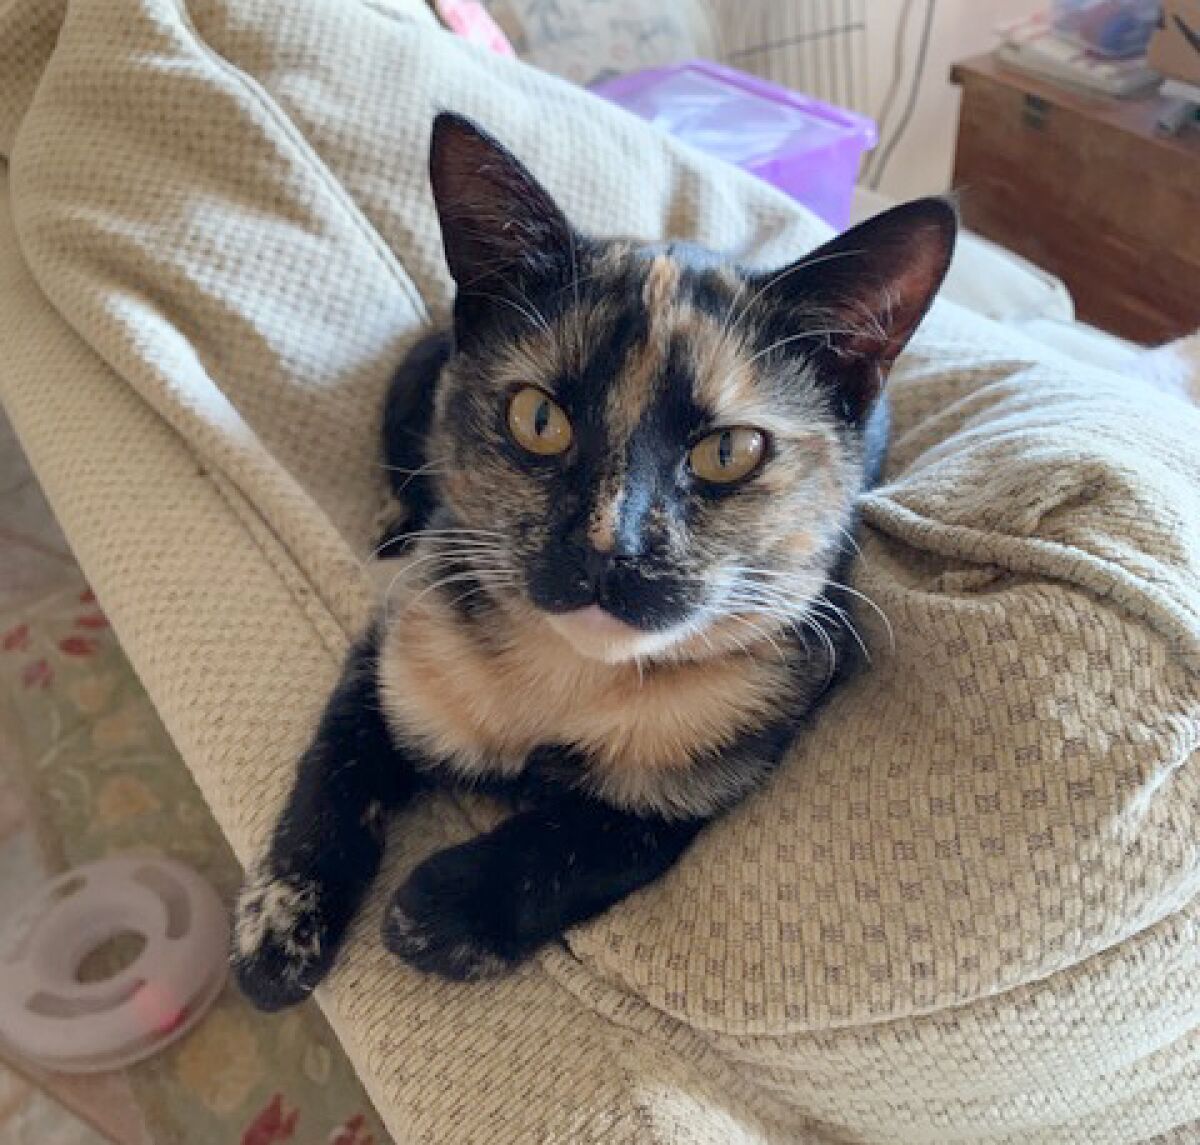 Willow the Wonder Kitty—so nicknamed because she was born with only one kidney and one ovary—is hoping that the stay-at-home orders will give someone time to consider adopting her.